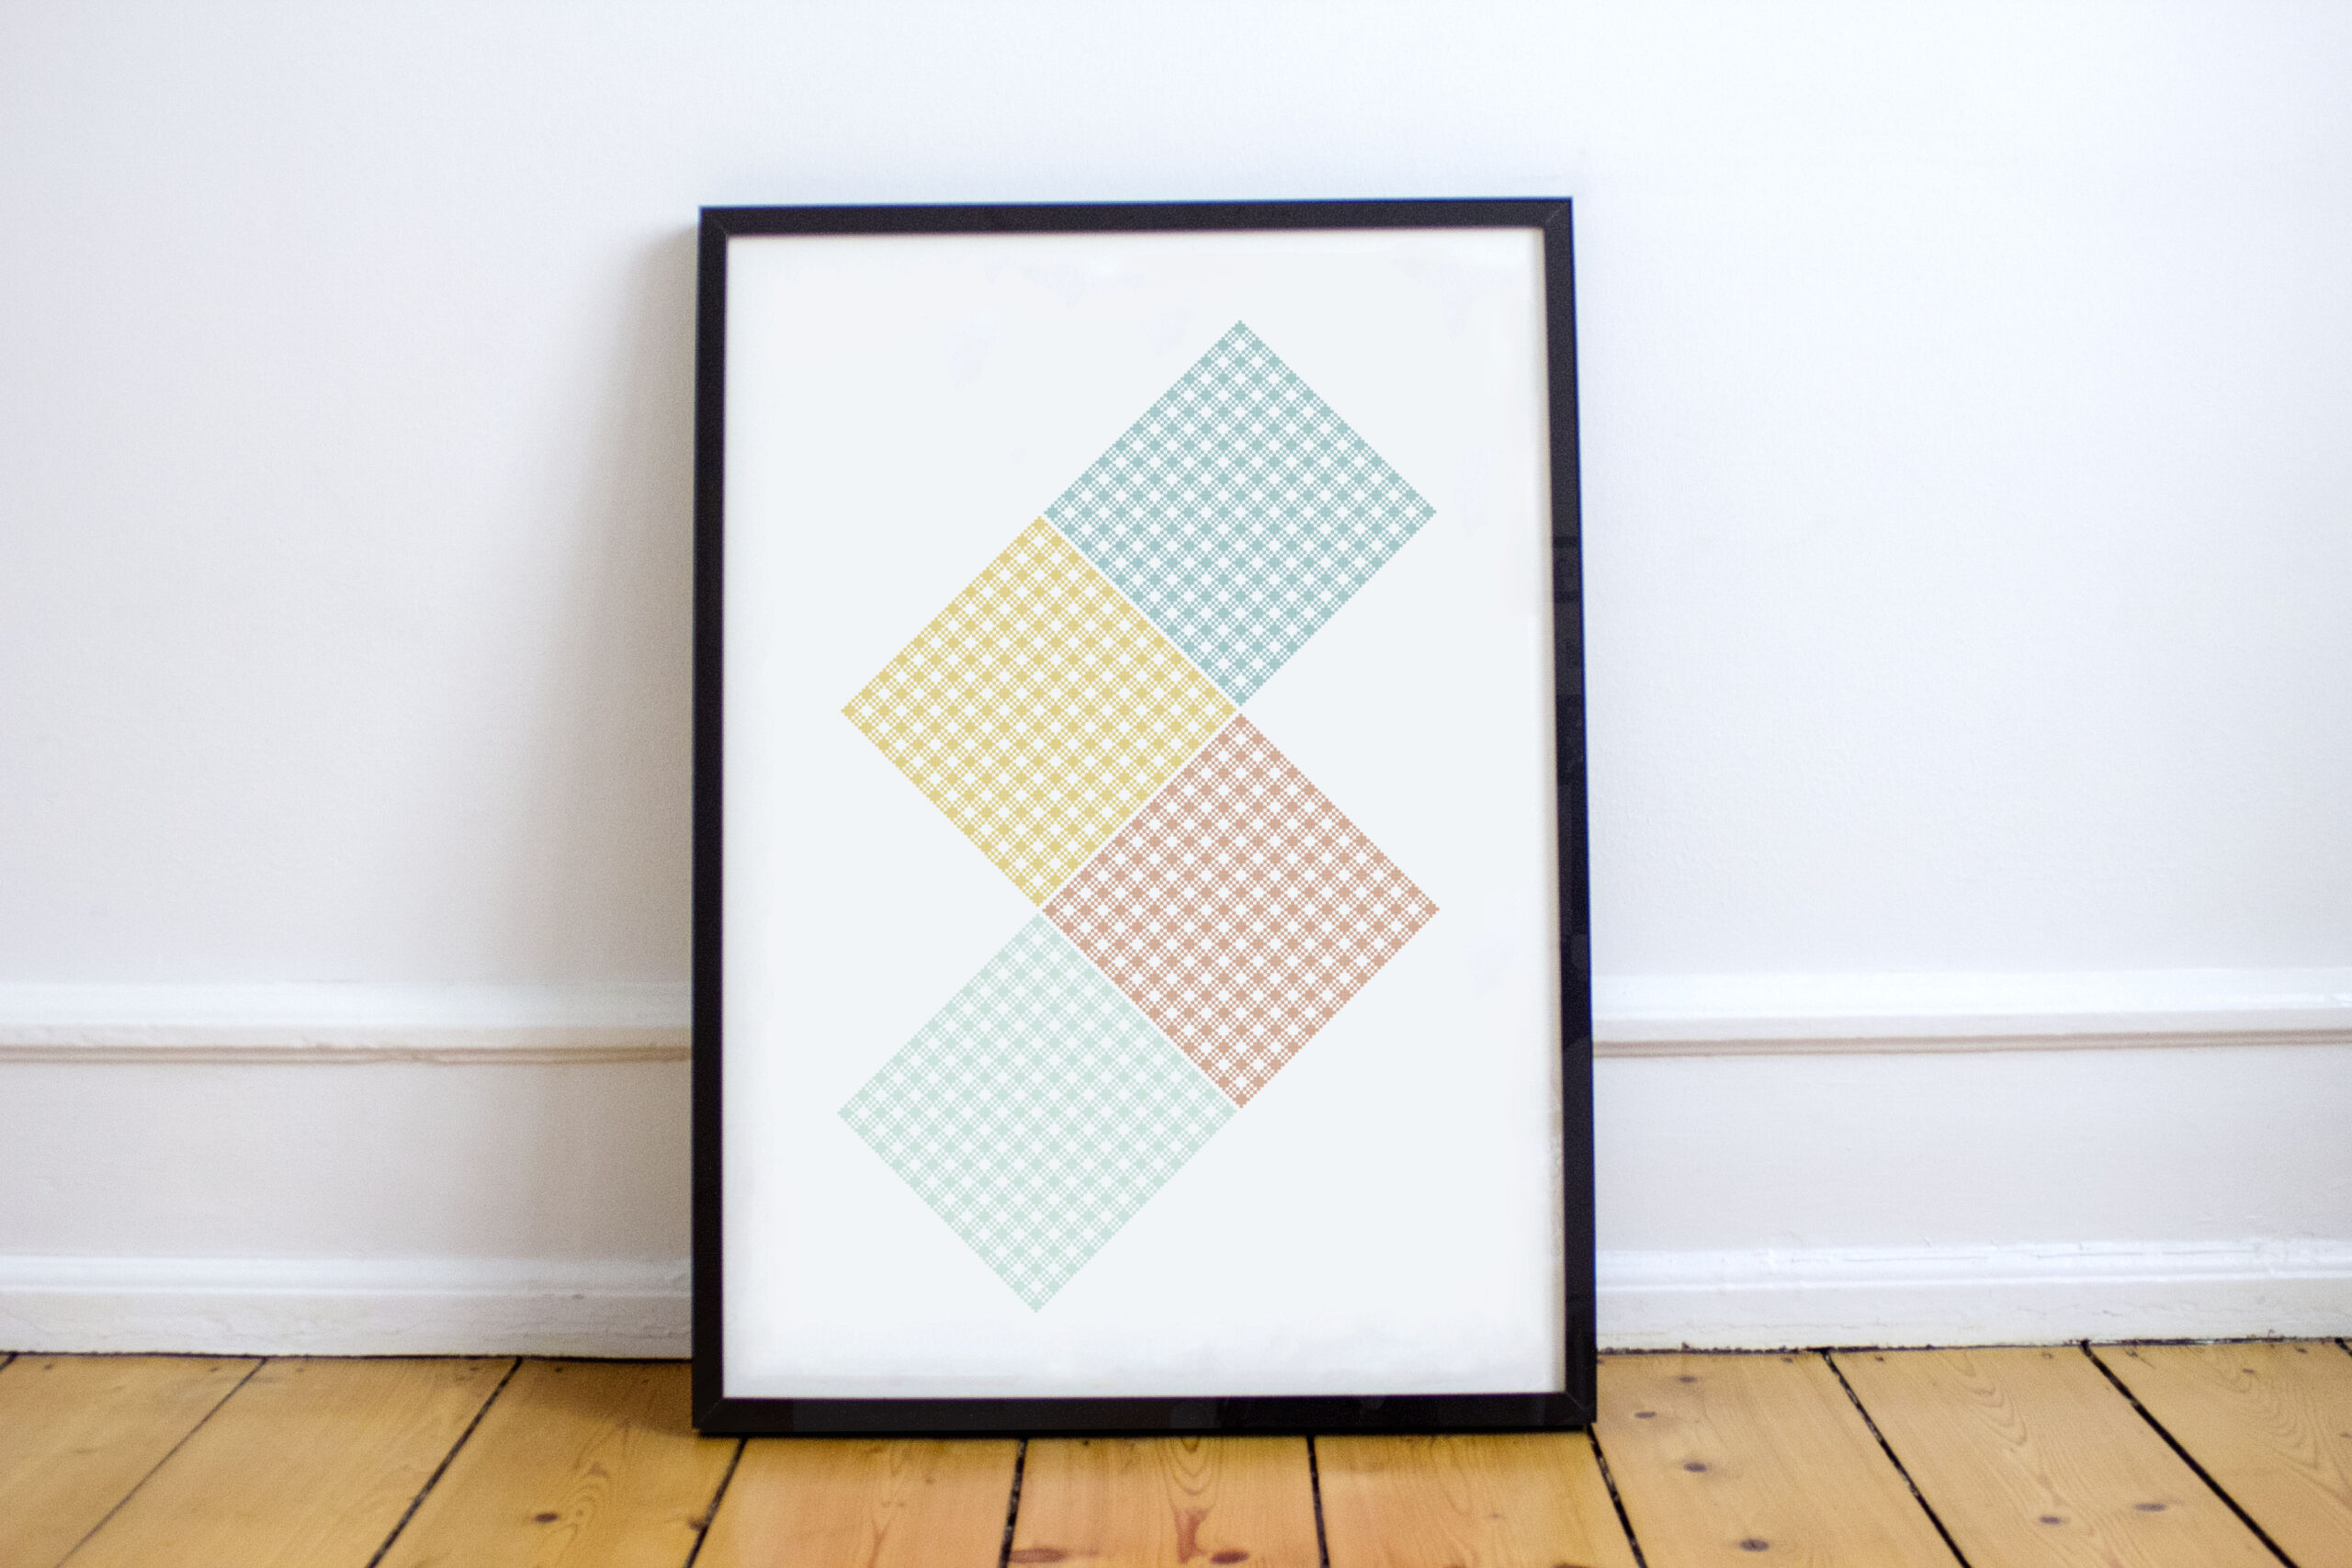 Geometric poster print, using the style of plaid knitting pattern